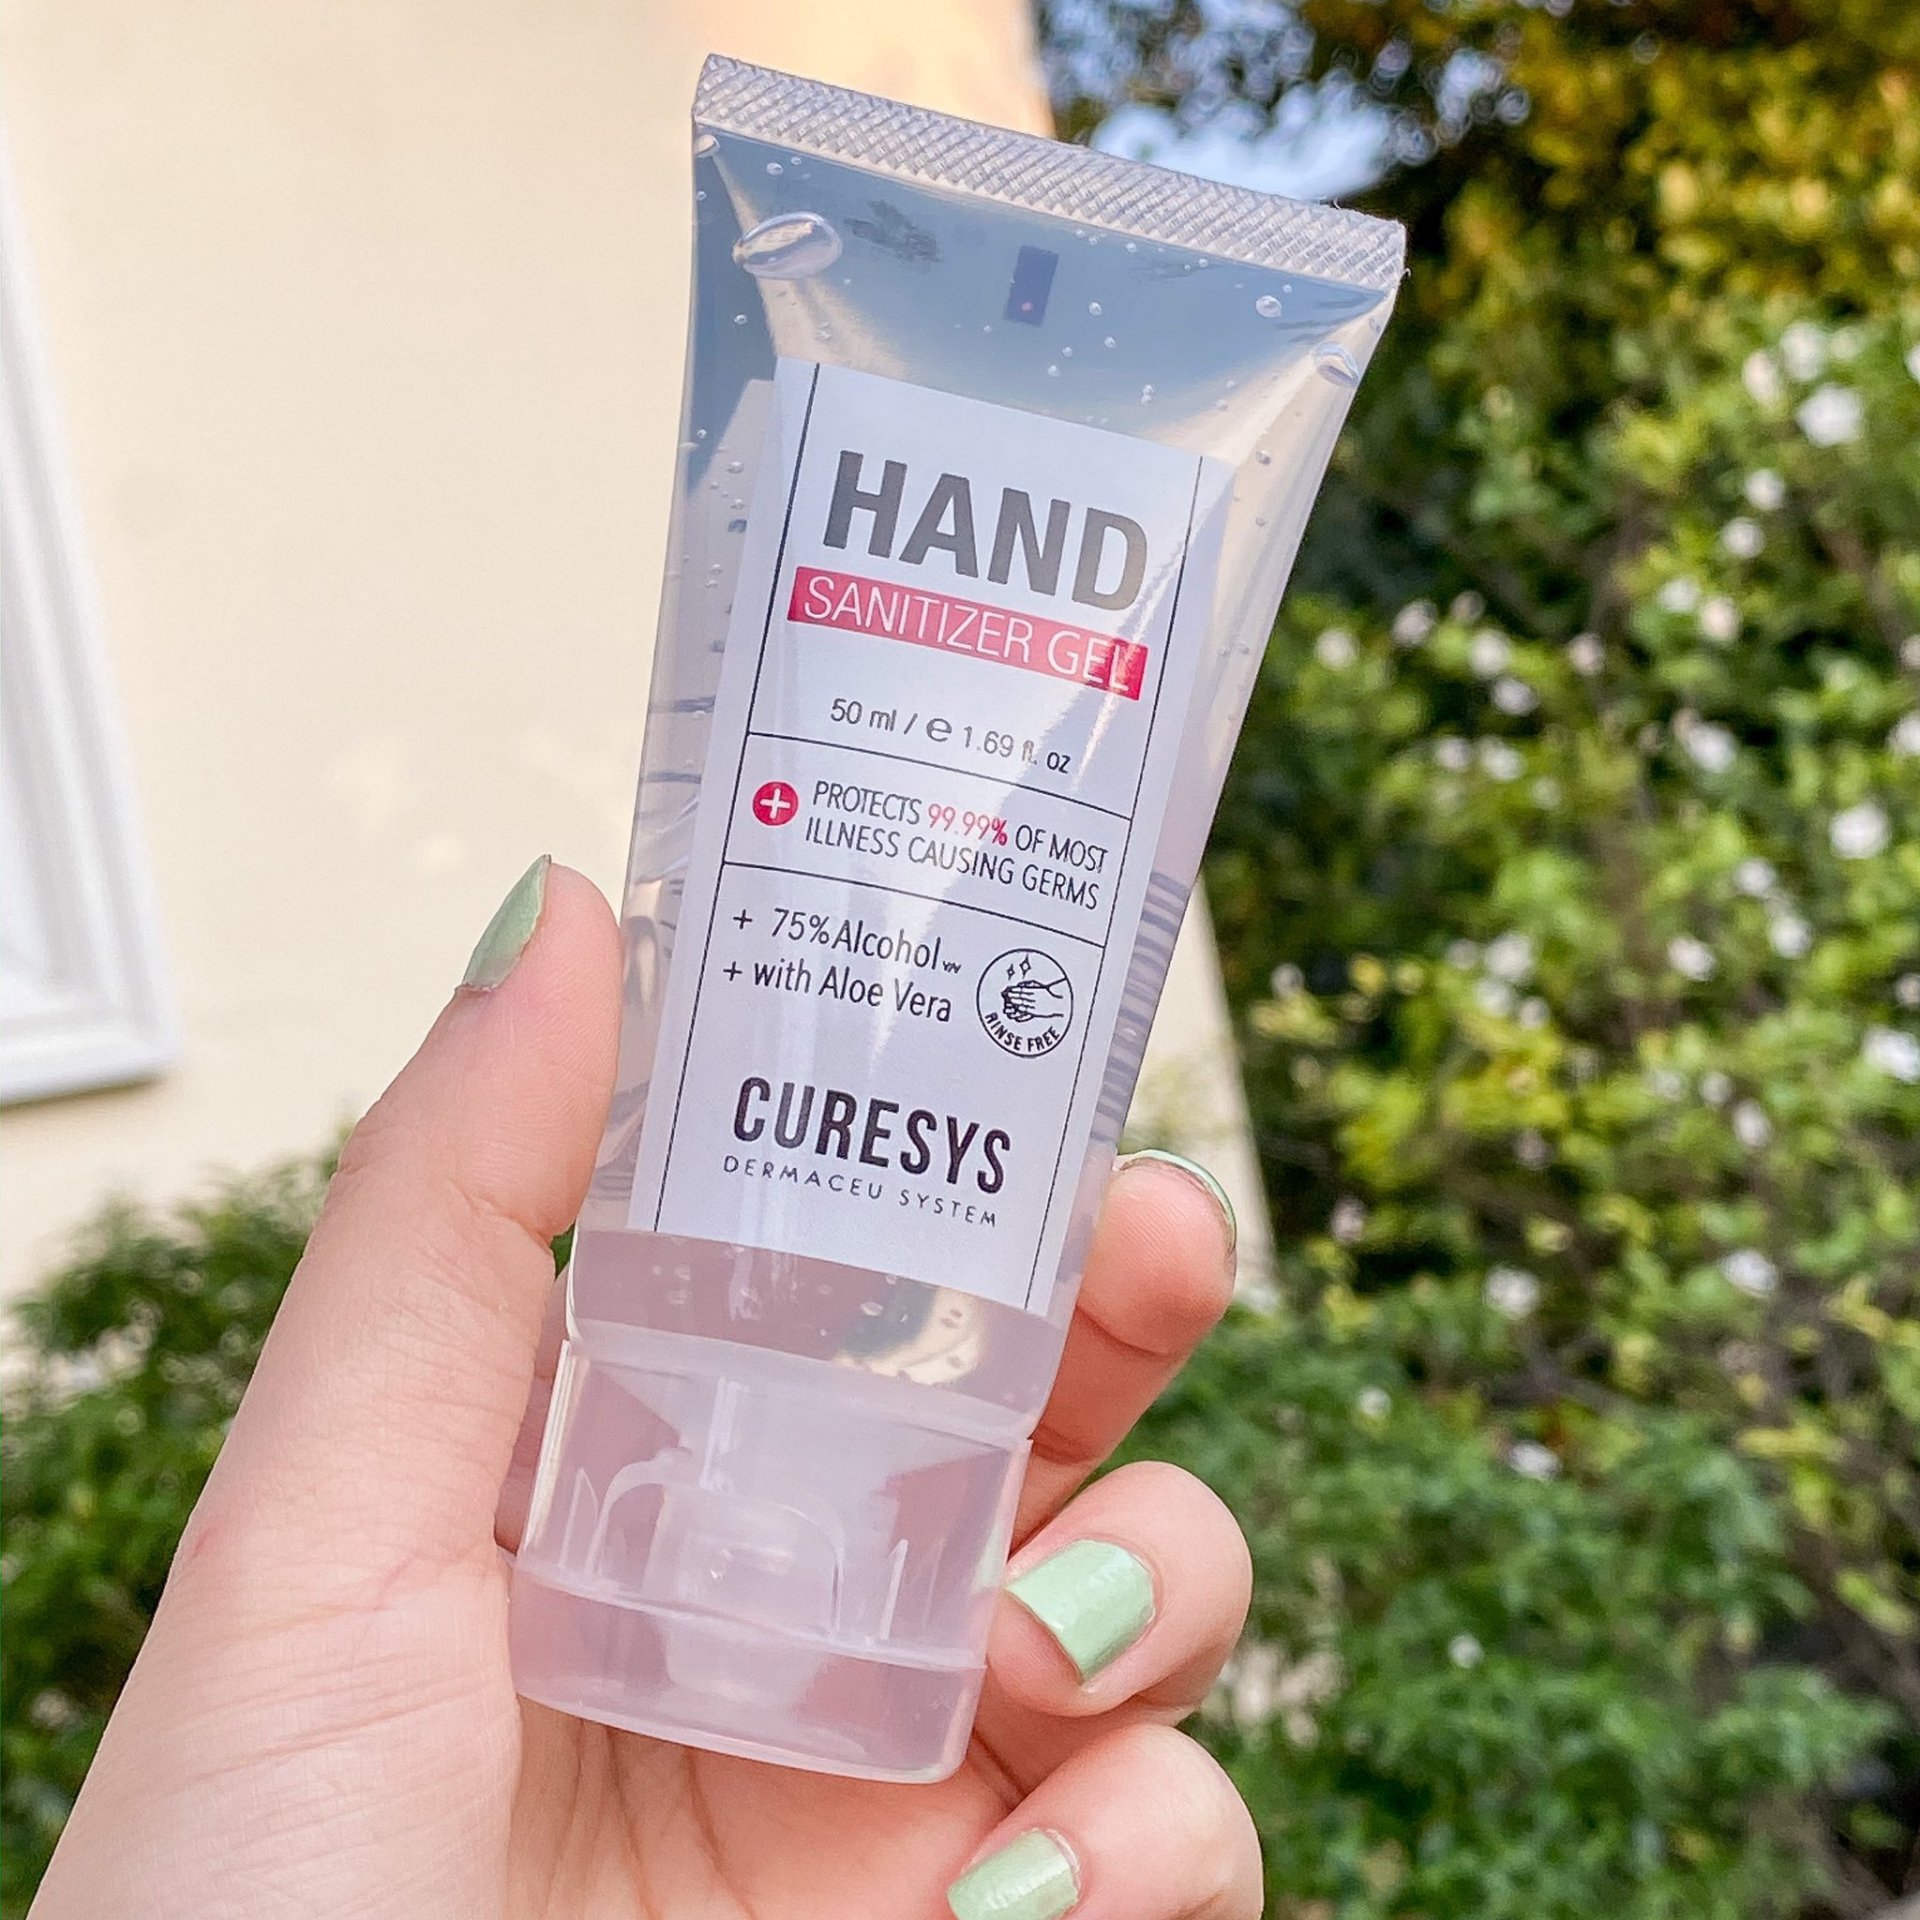 [Review] Curesys Hand Sanitizer Gel 50ml #2